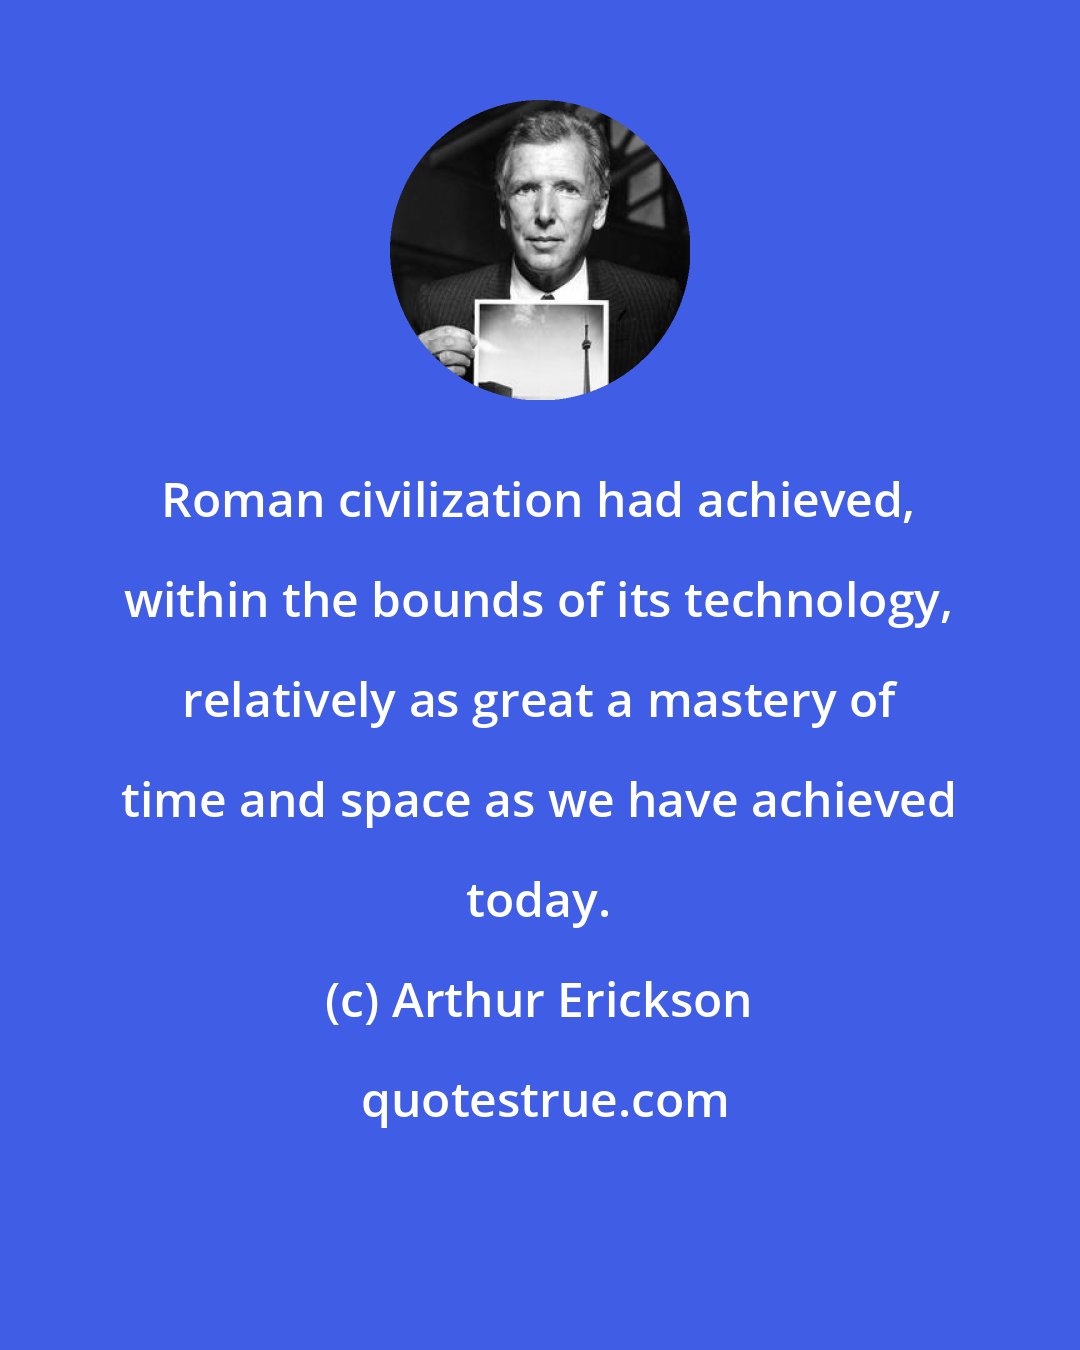 Arthur Erickson: Roman civilization had achieved, within the bounds of its technology, relatively as great a mastery of time and space as we have achieved today.